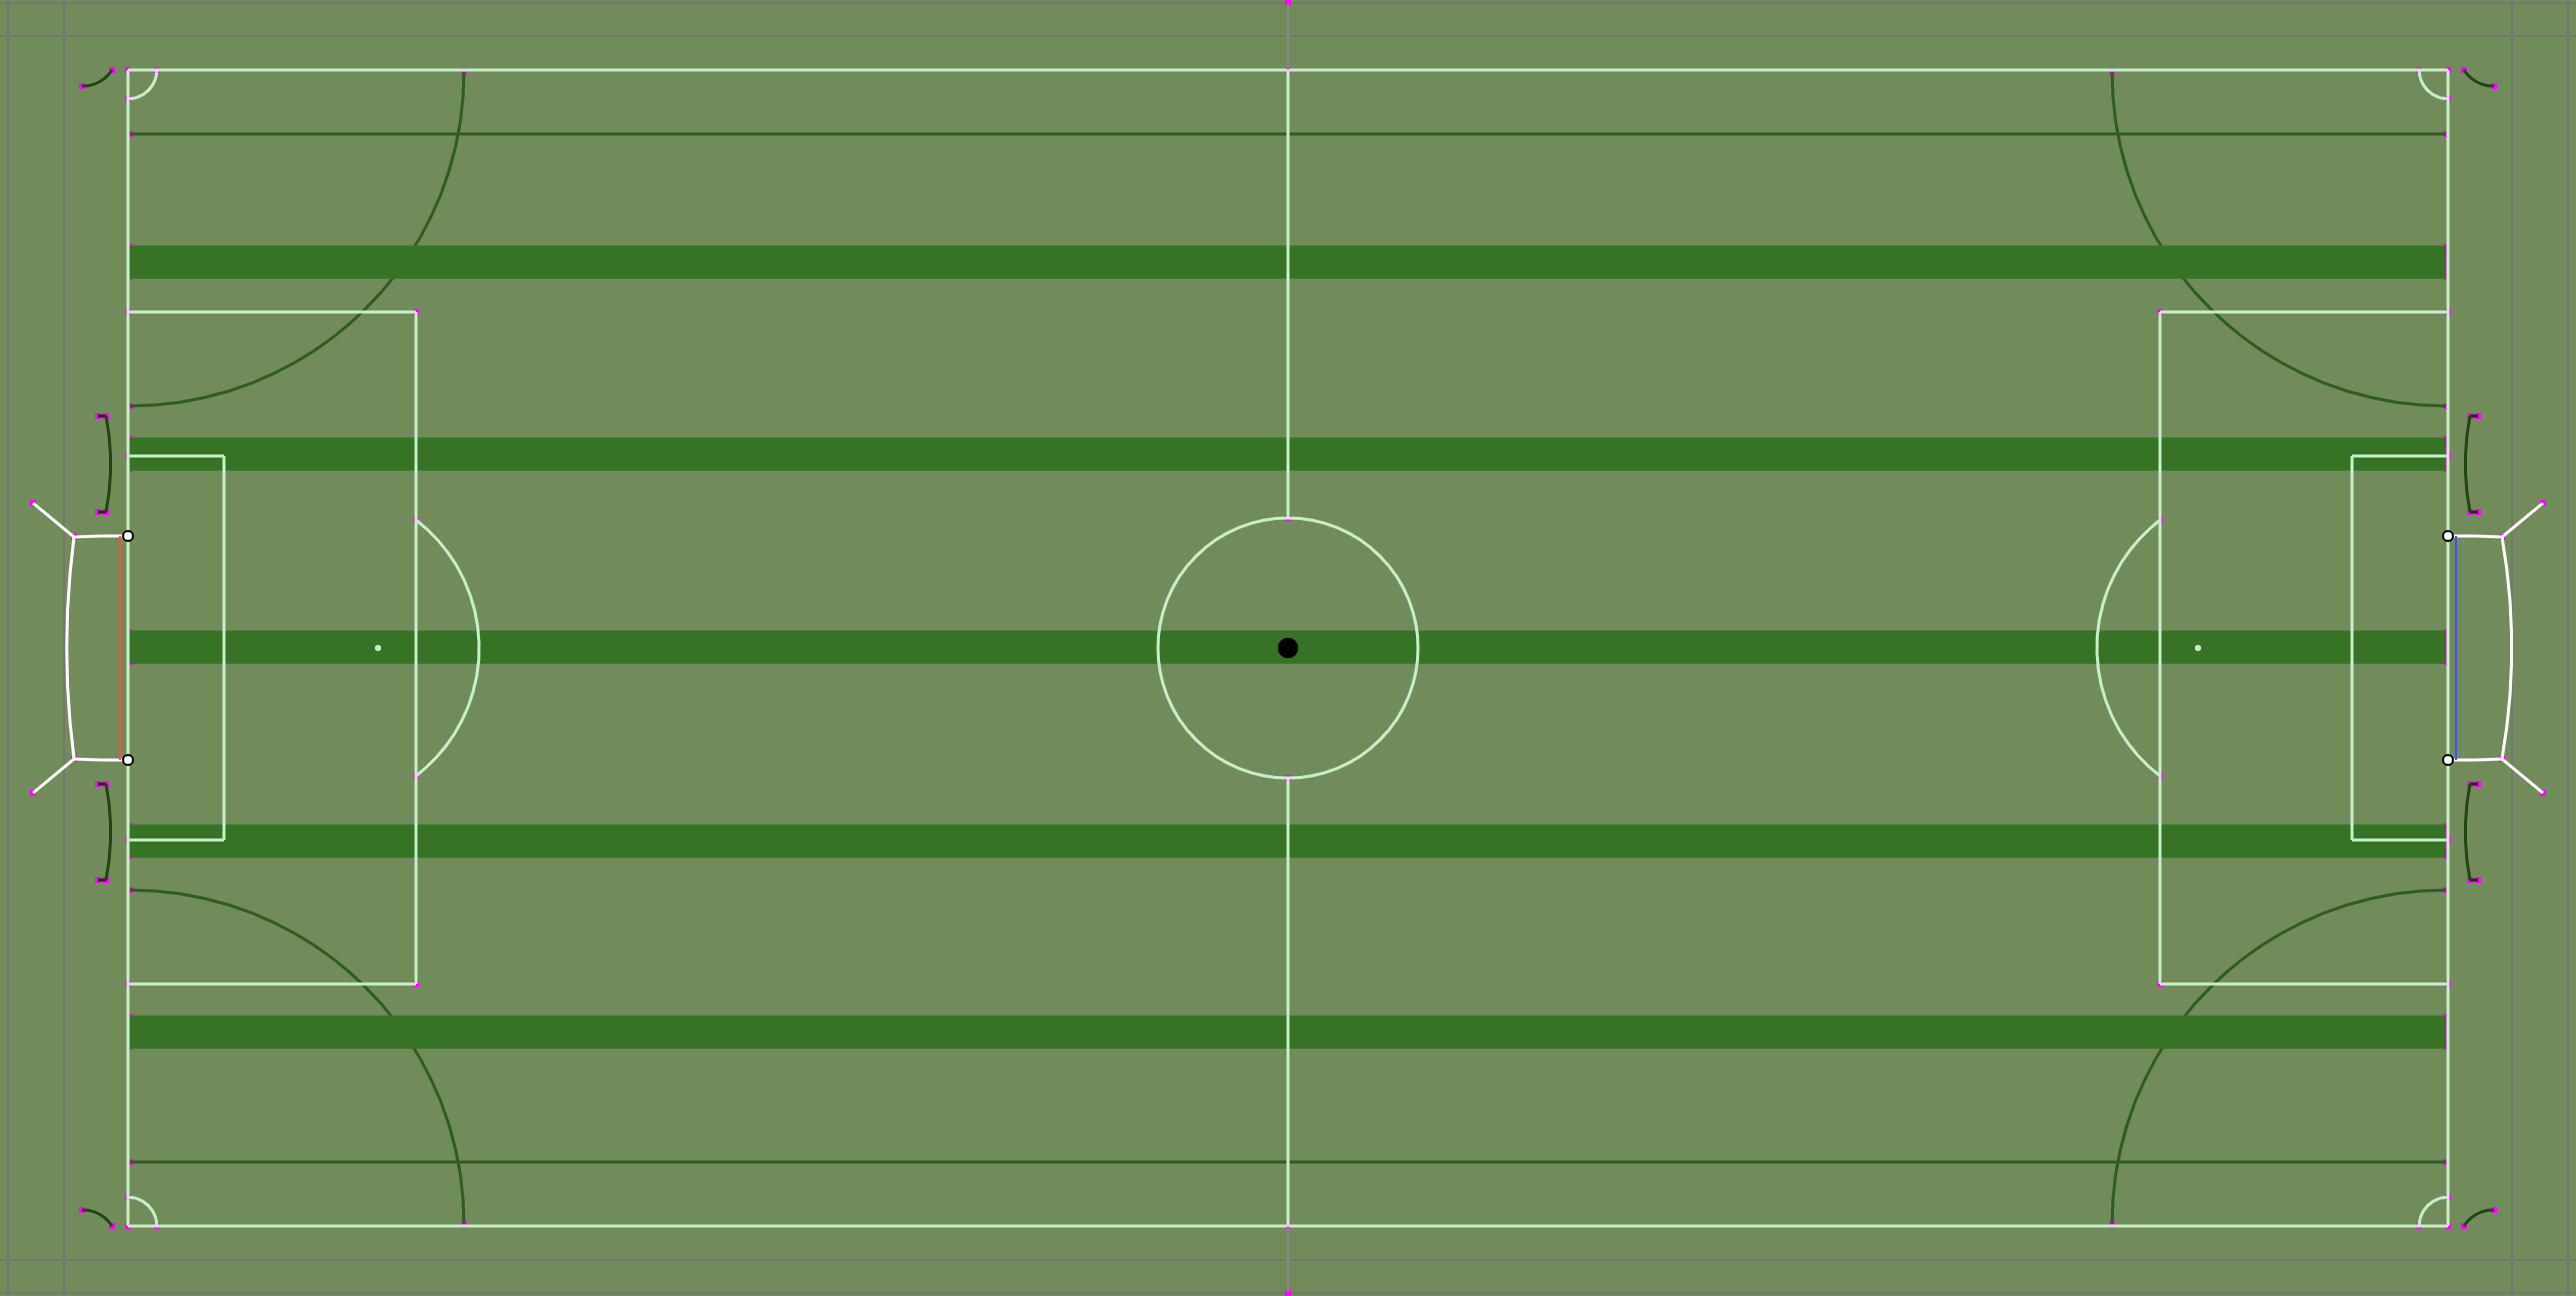 hax ball maps | Real Soccer V4 Super Striped Field